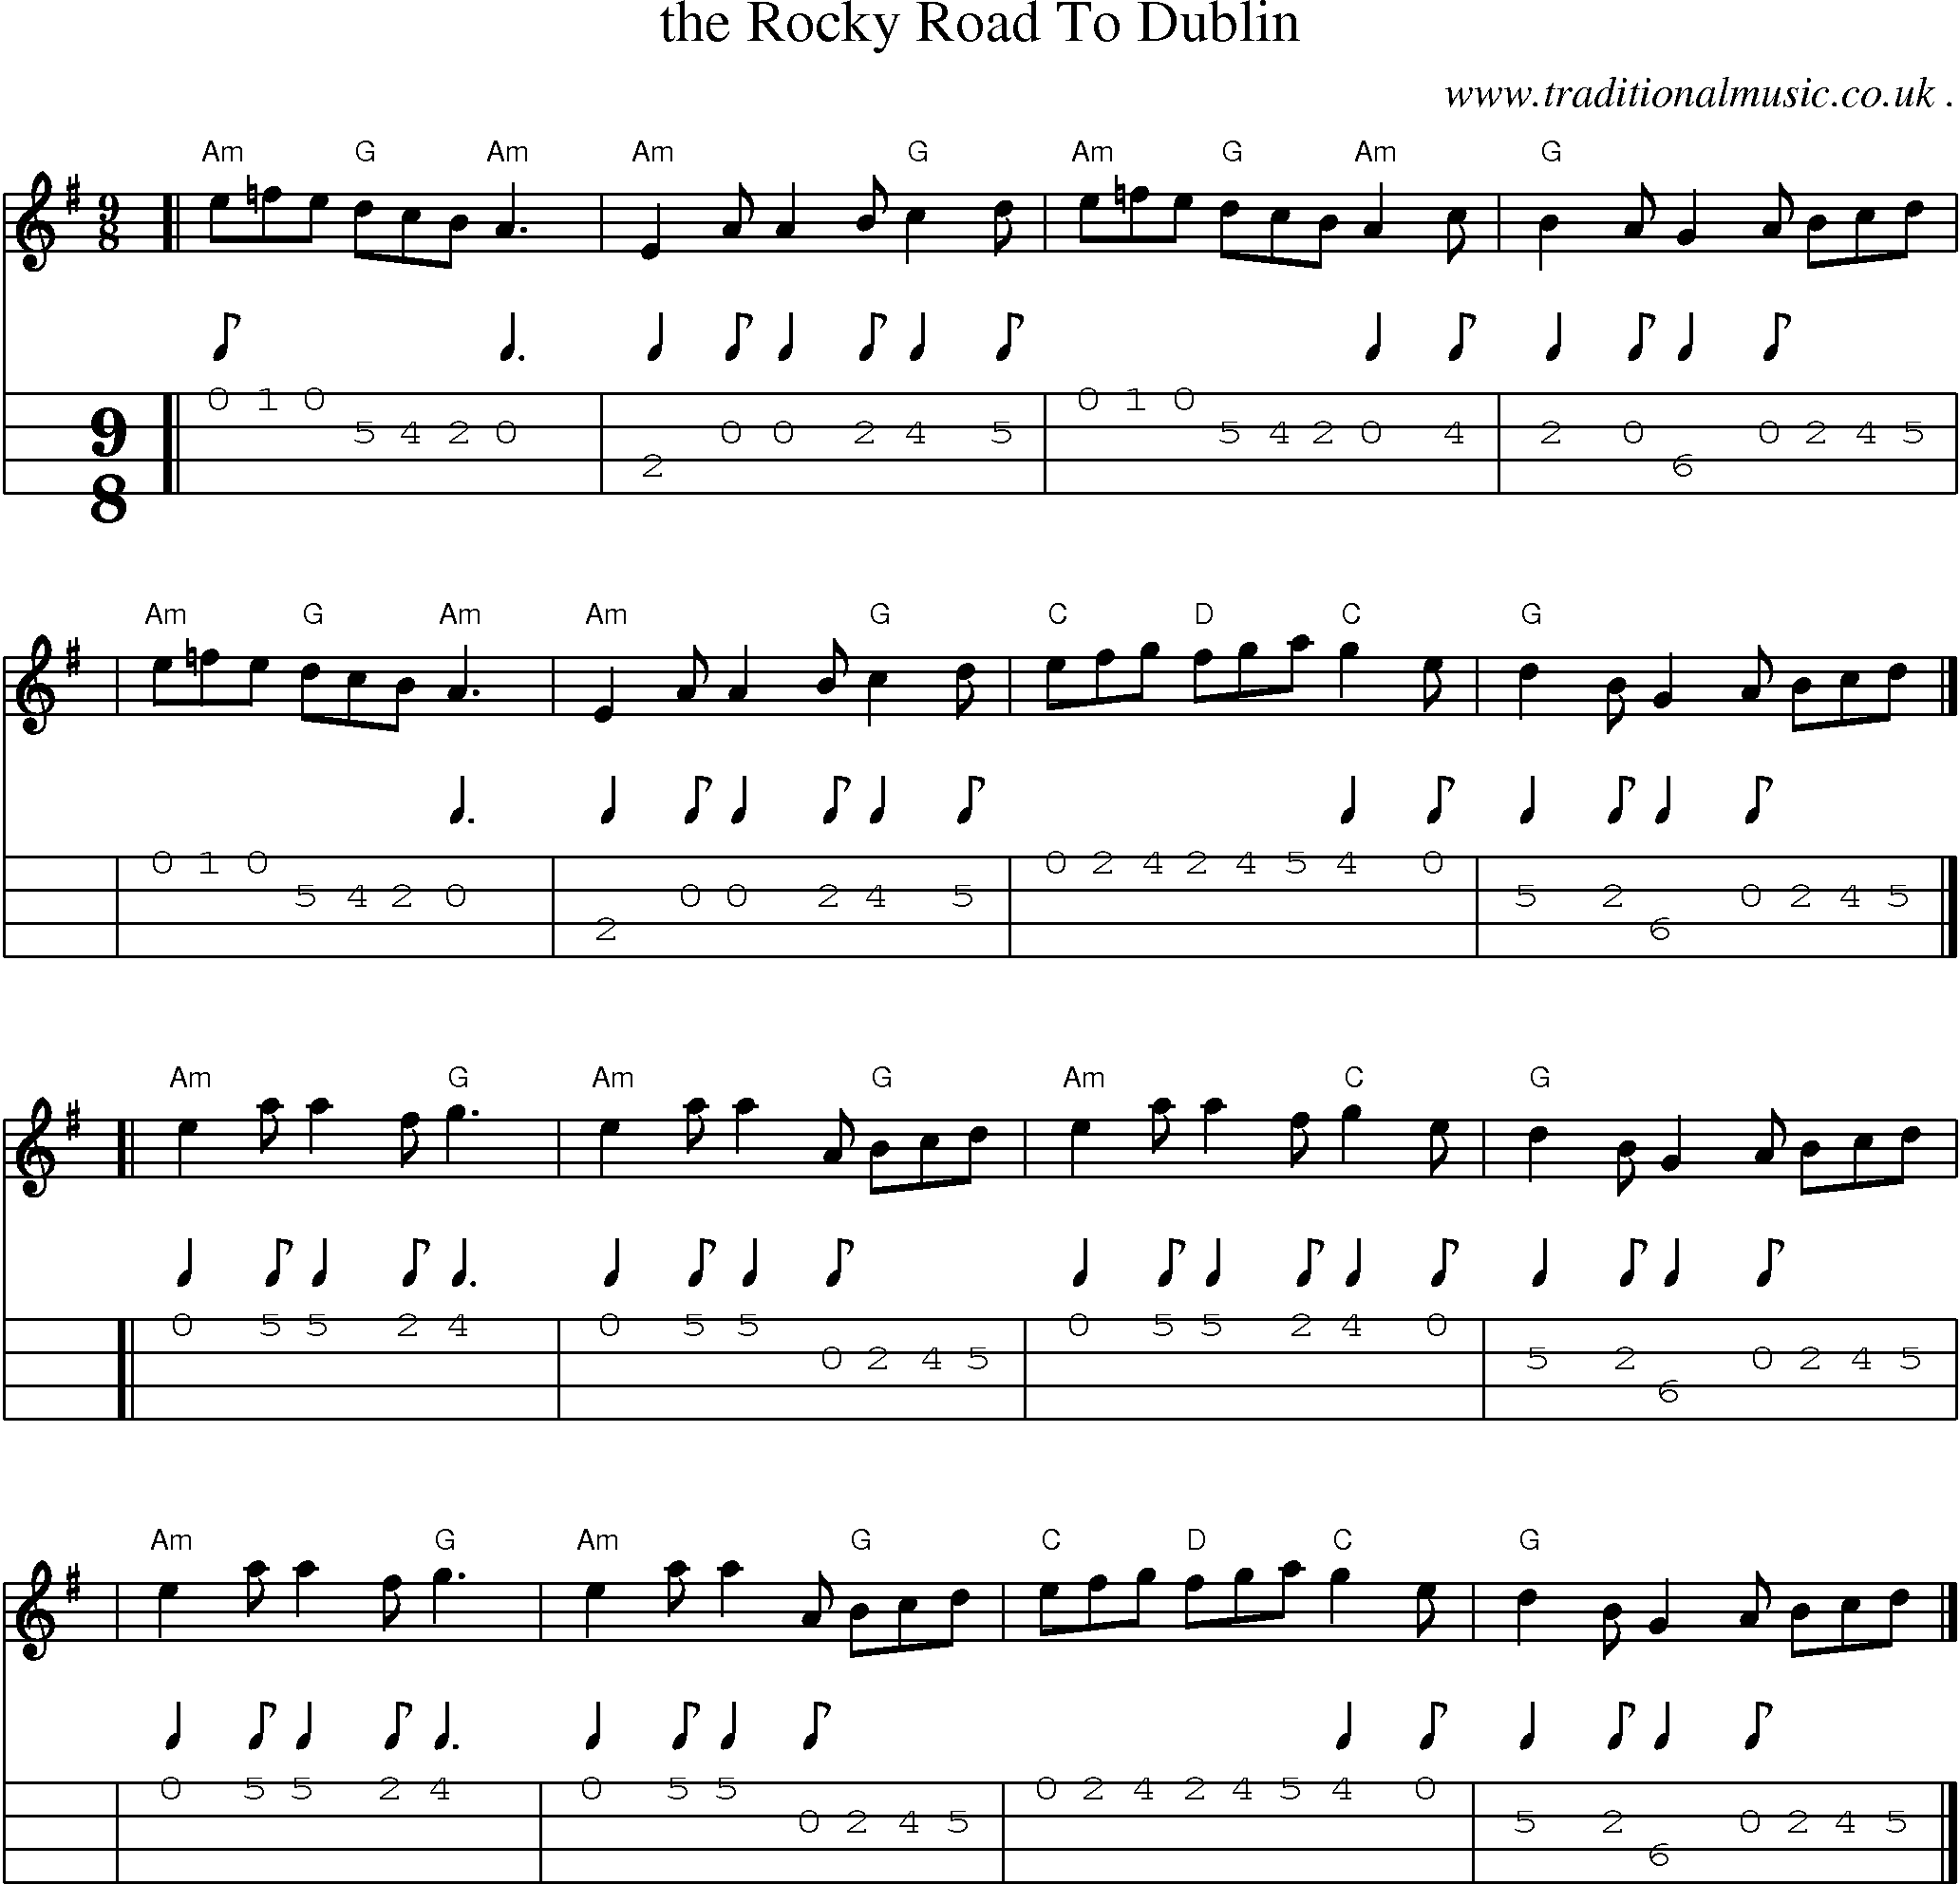 Sheet-music  score, Chords and Mandolin Tabs for The Rocky Road To Dublin